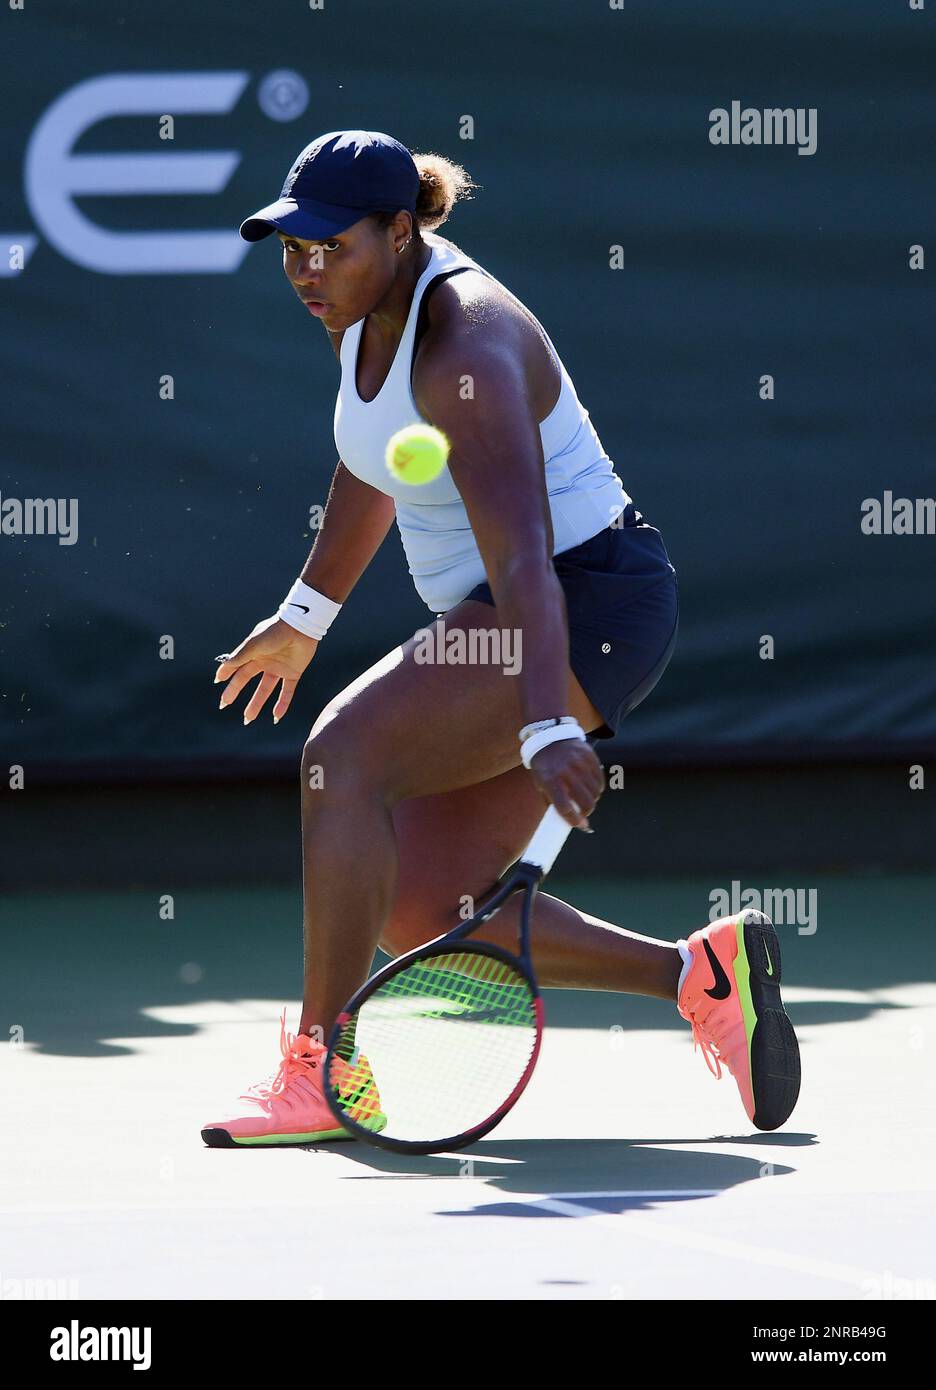 NEWPORT BEACH, CA - JANUARY 29: WTA tennis player Taylor Townsend (USA)  returns a shot in a match during the Oracle Challenger Series played on  January 29, 2020 at the Newport Beach